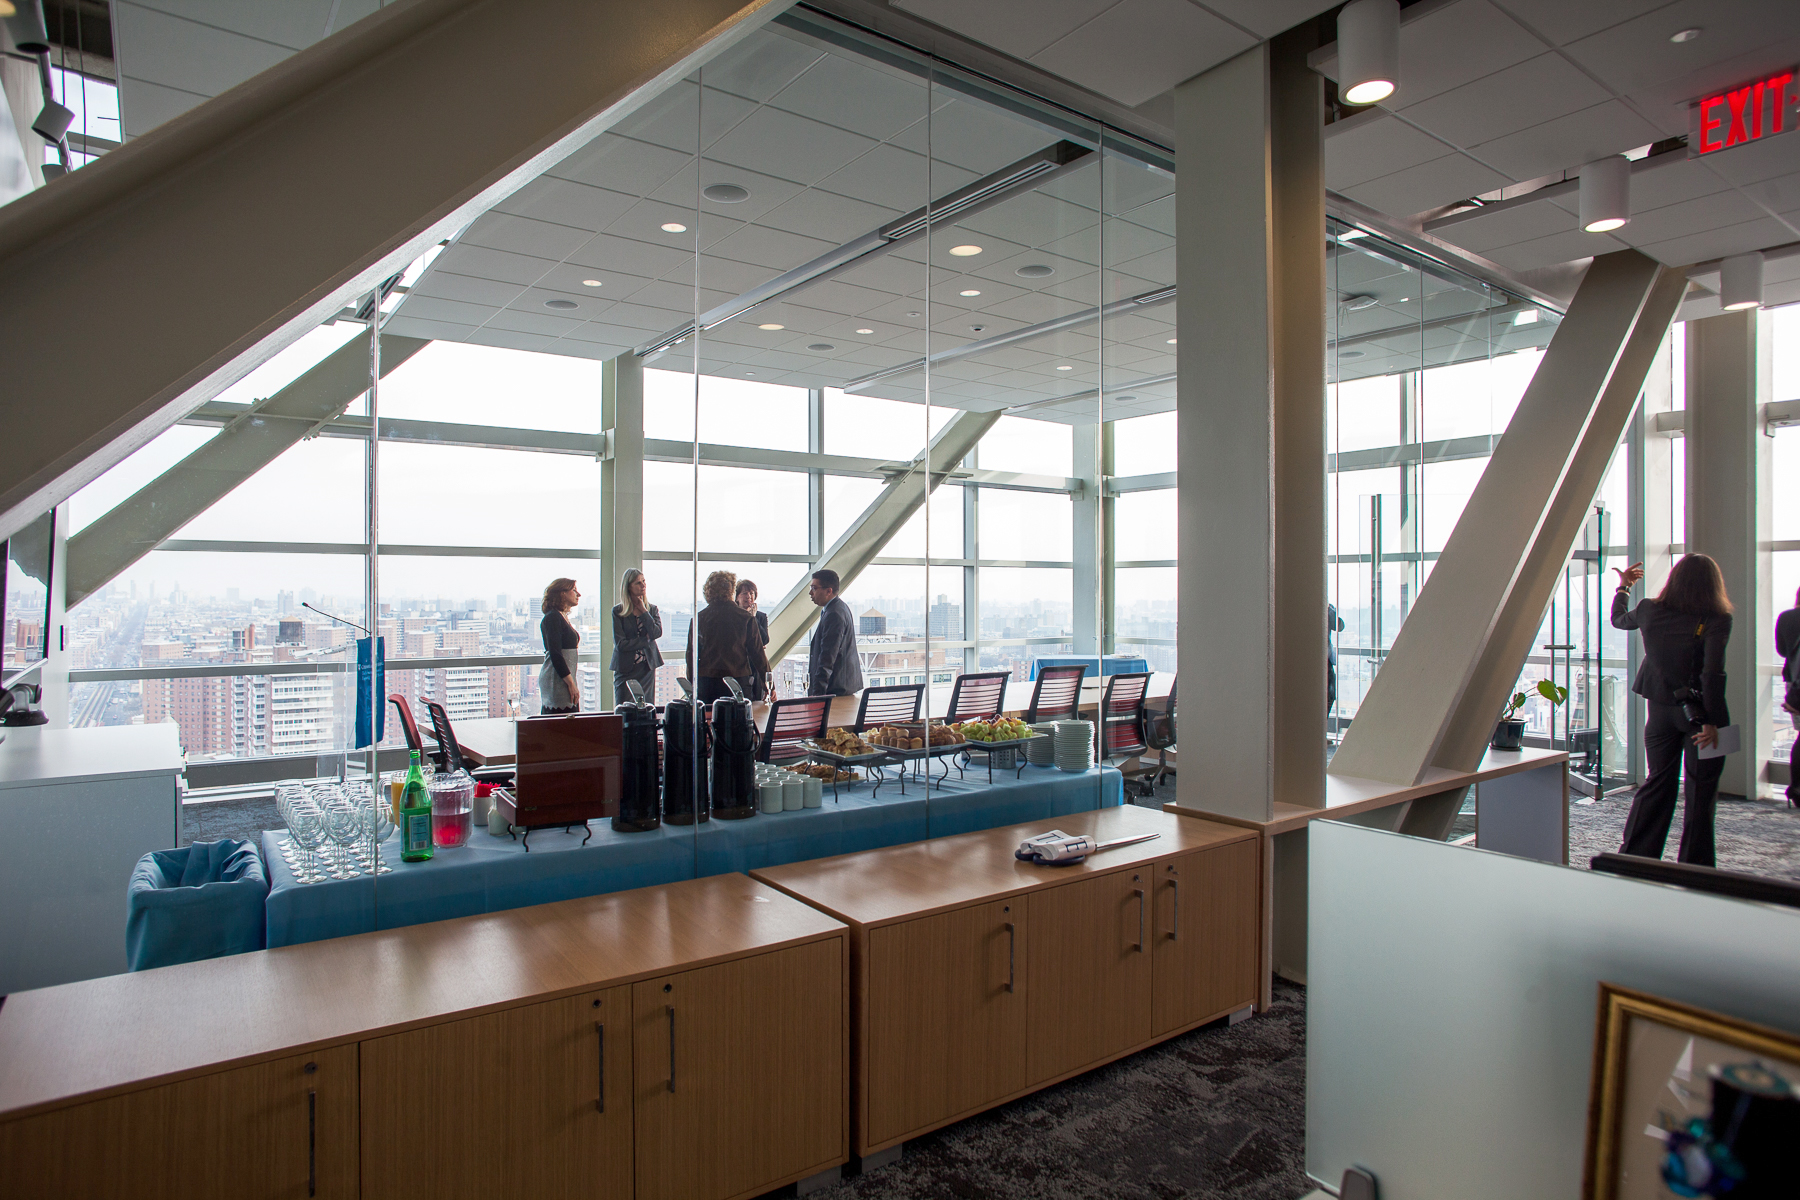 A view of the Northwest Corner Beacon conference room with people gathering around by the windows.